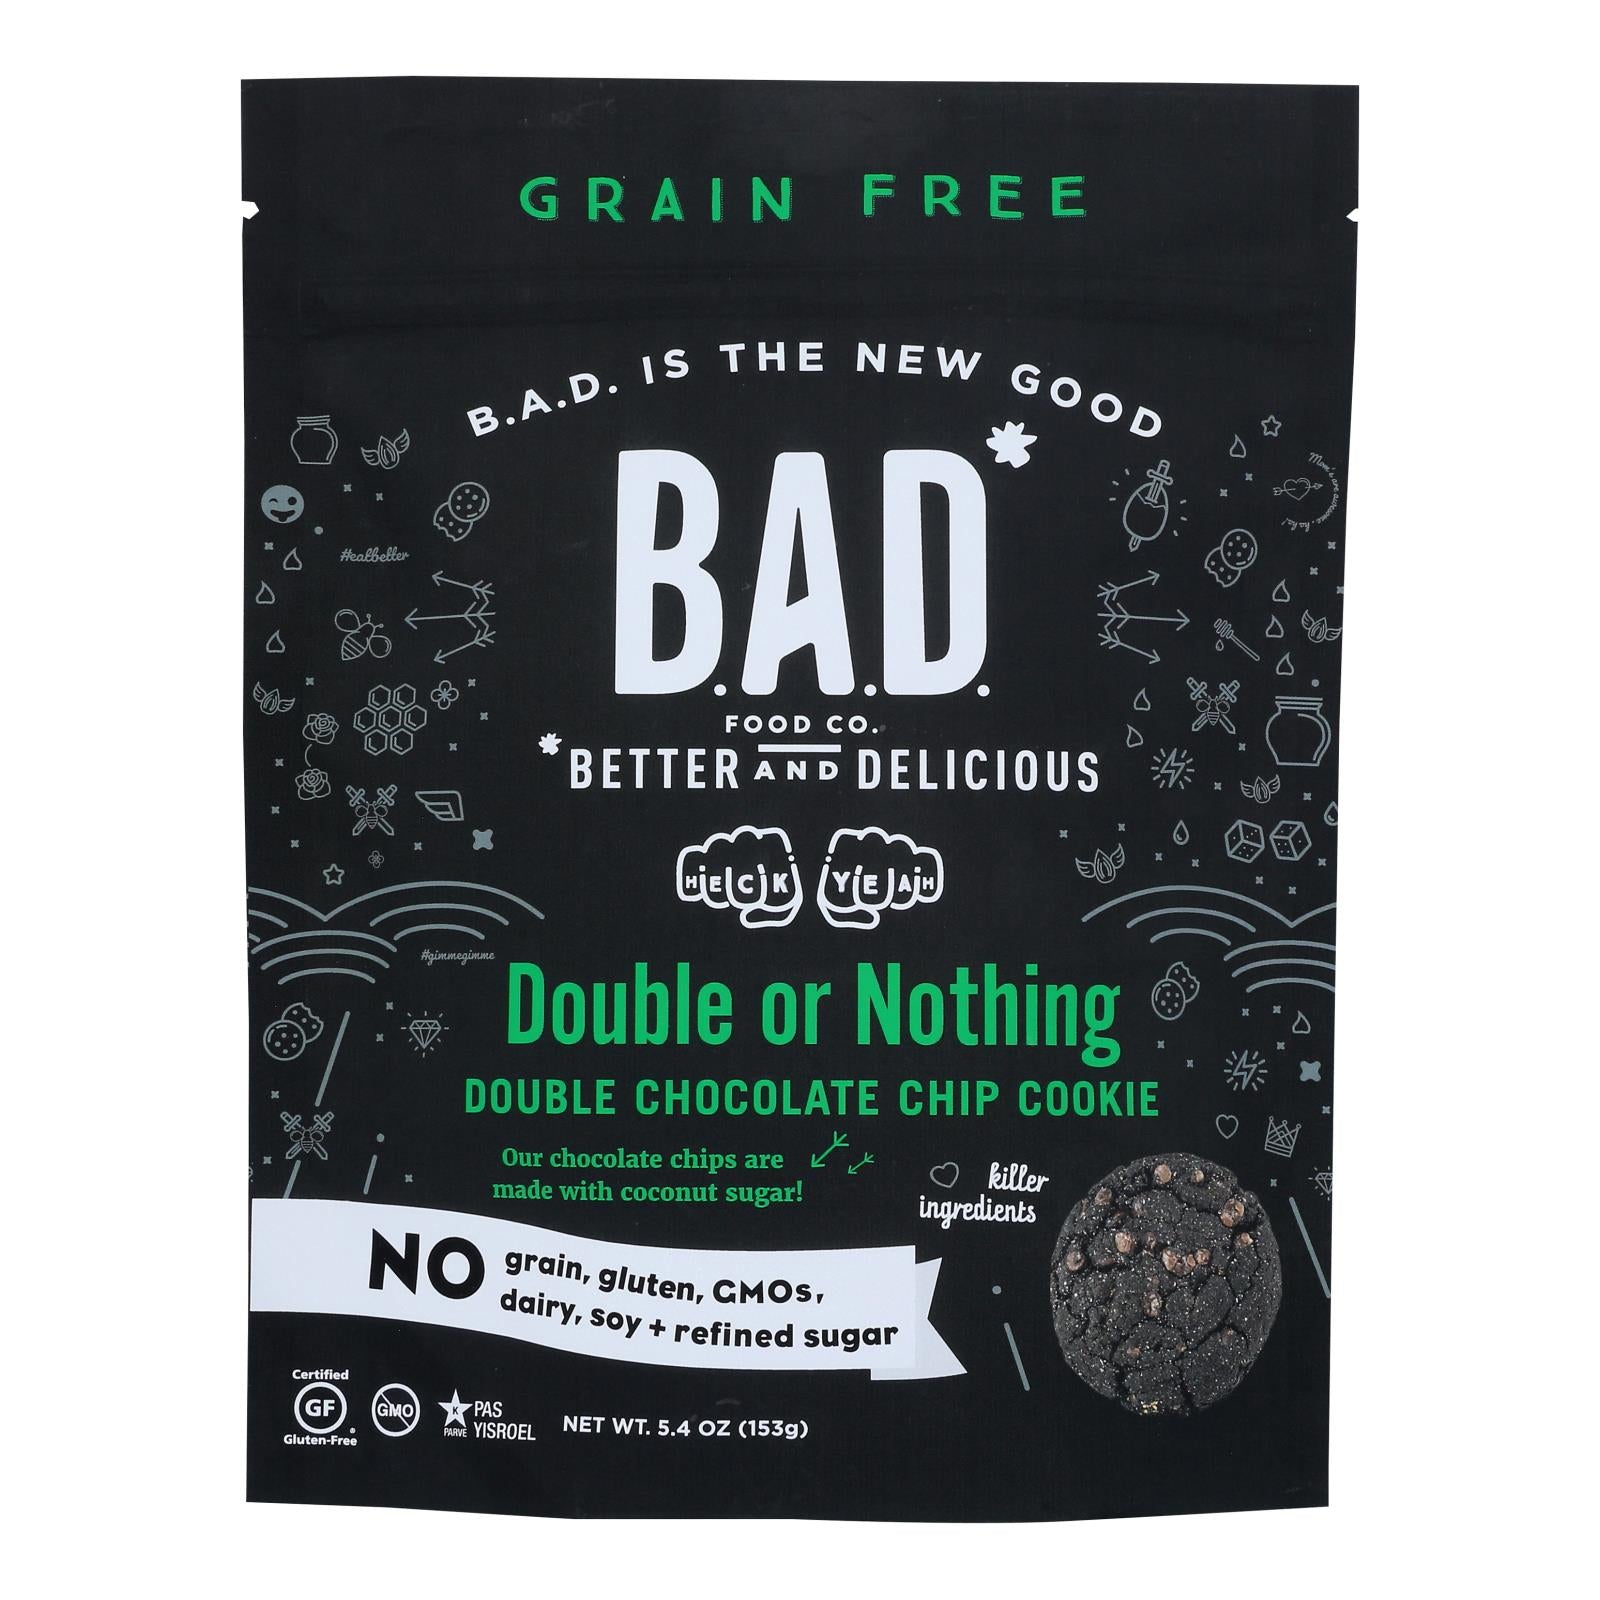 B.A.D. FOOD CO., B.a.d. Food Co. - Cookies Double Chocolate Choc Chips - Case of 6-5.4 OZ (Pack of 6)